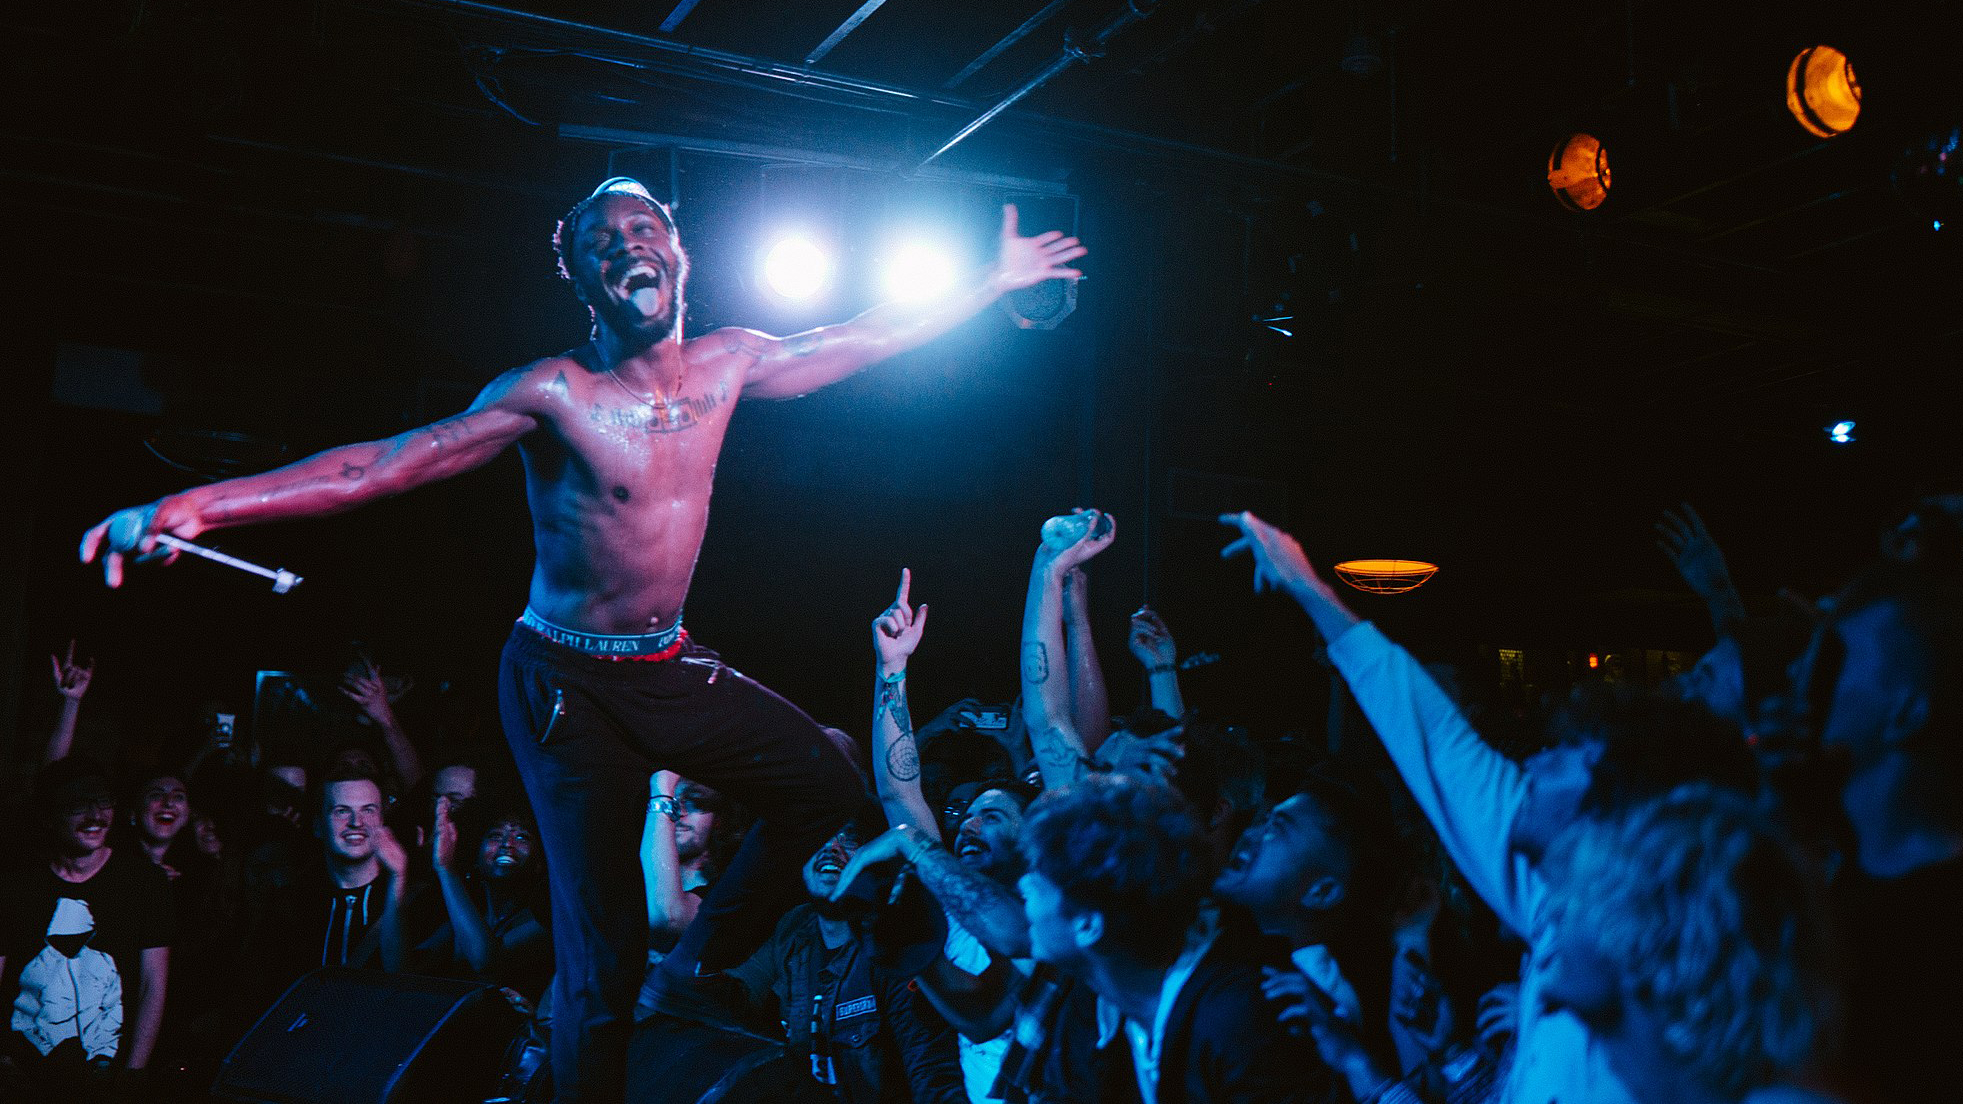 JPEGMAFIA fills Baltimore Soundstage with charisma and creativity